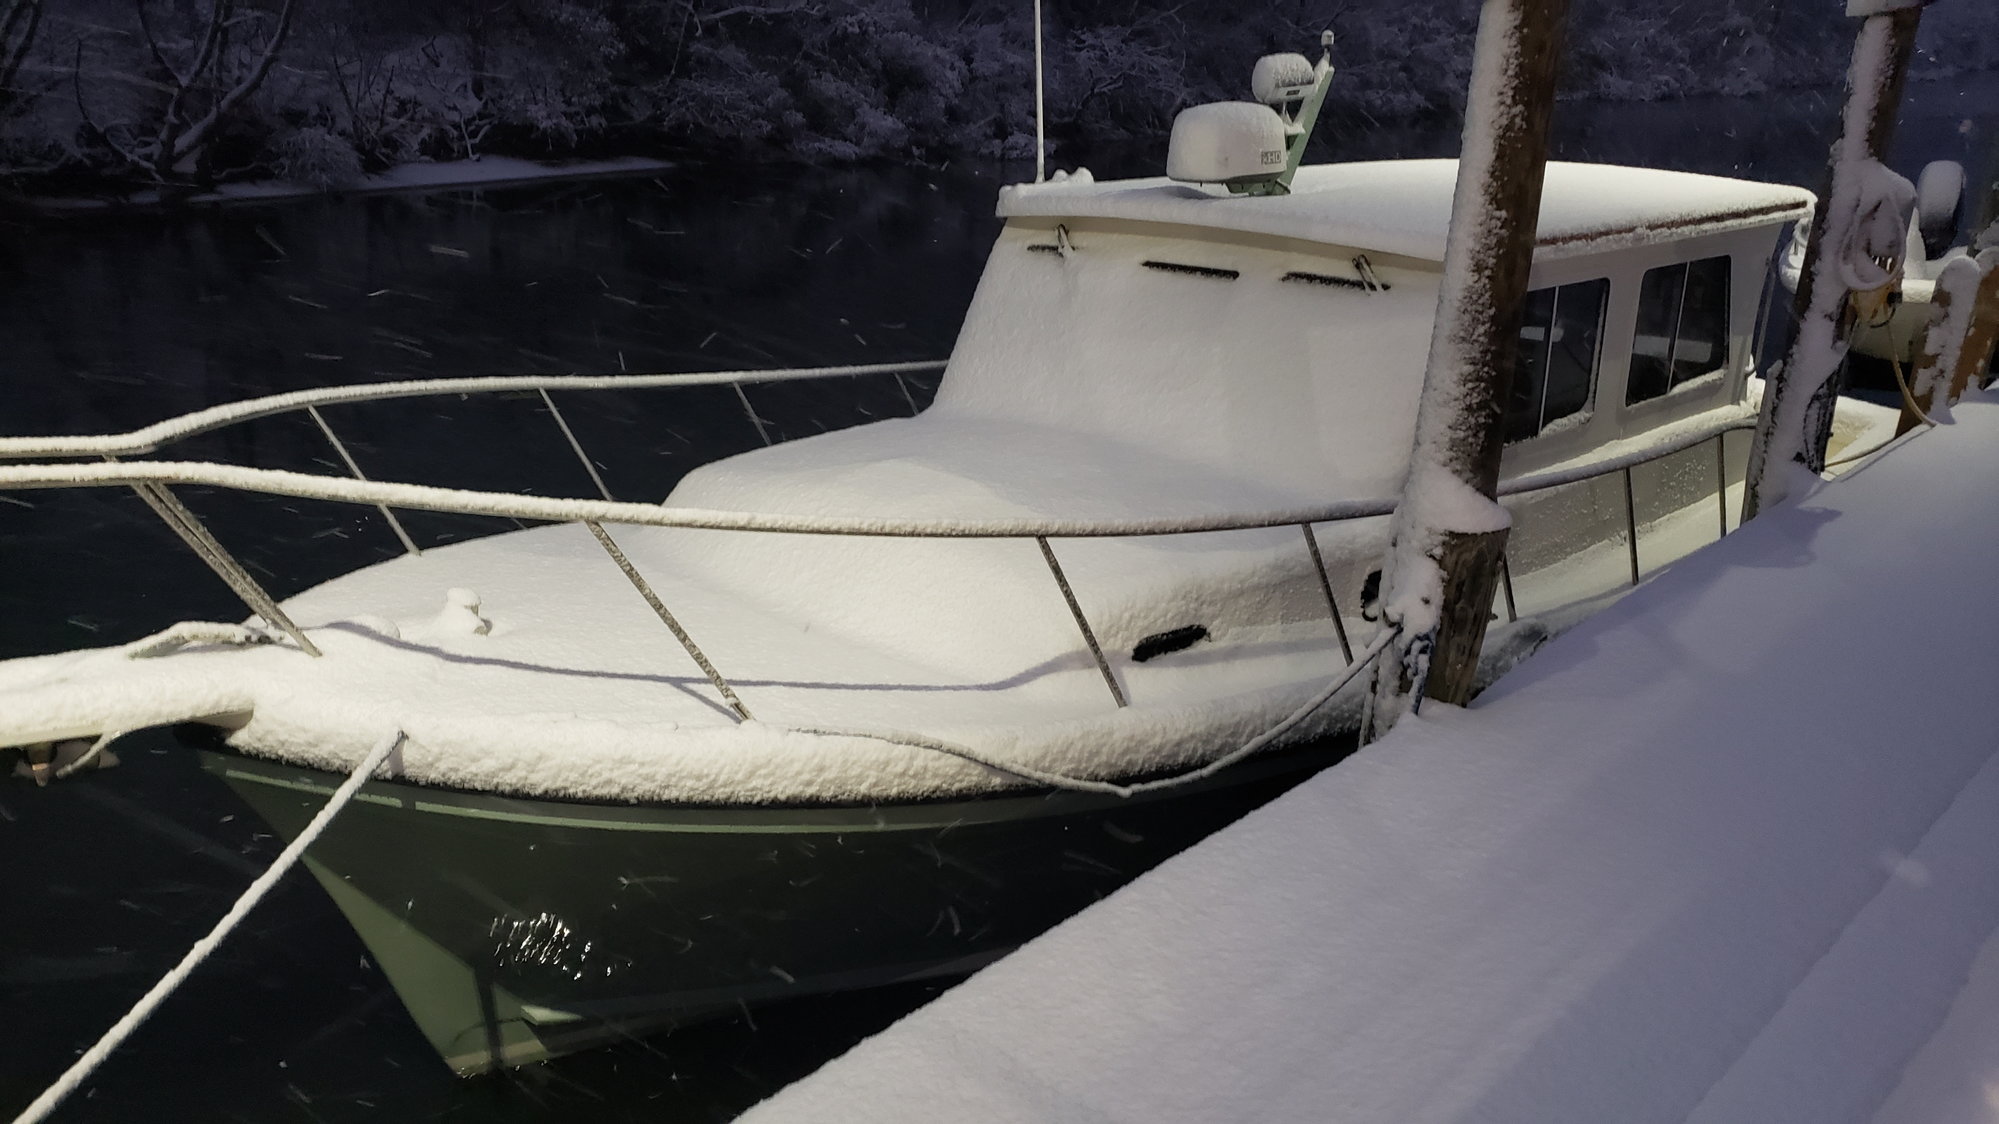 Winterization:Shrink Wrap vs. Bungees and Tarp - The Hull 